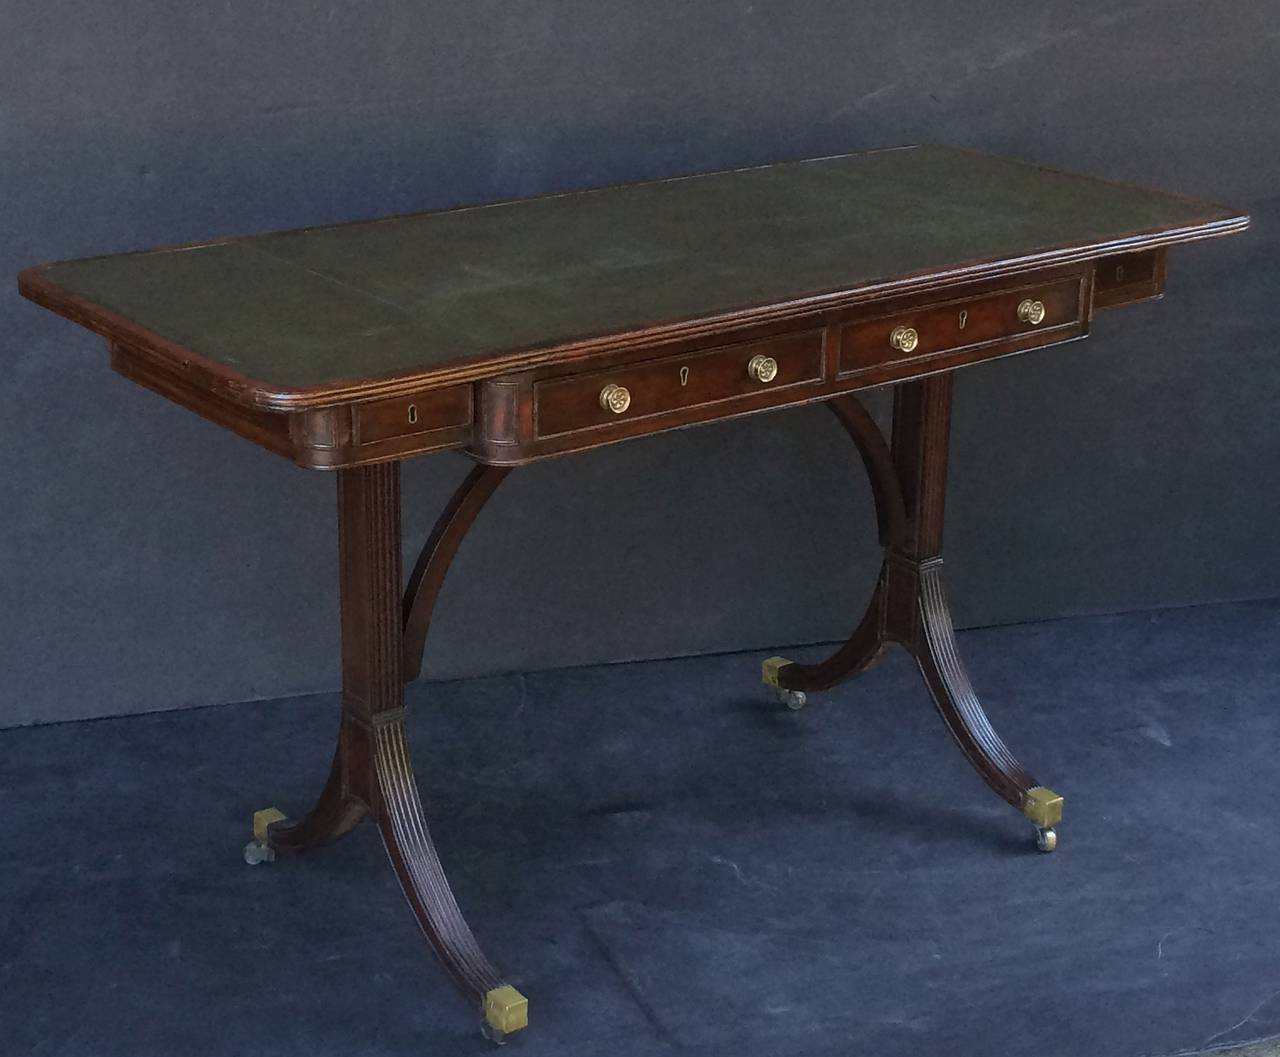 A fine English writing table or desk from the Regency period, featuring a moulded top with embossed leather, Over a breakfront frieze with four drawers, the opposing side with matching faux drawers. Resting on a reeded leg stretcher base, with brass